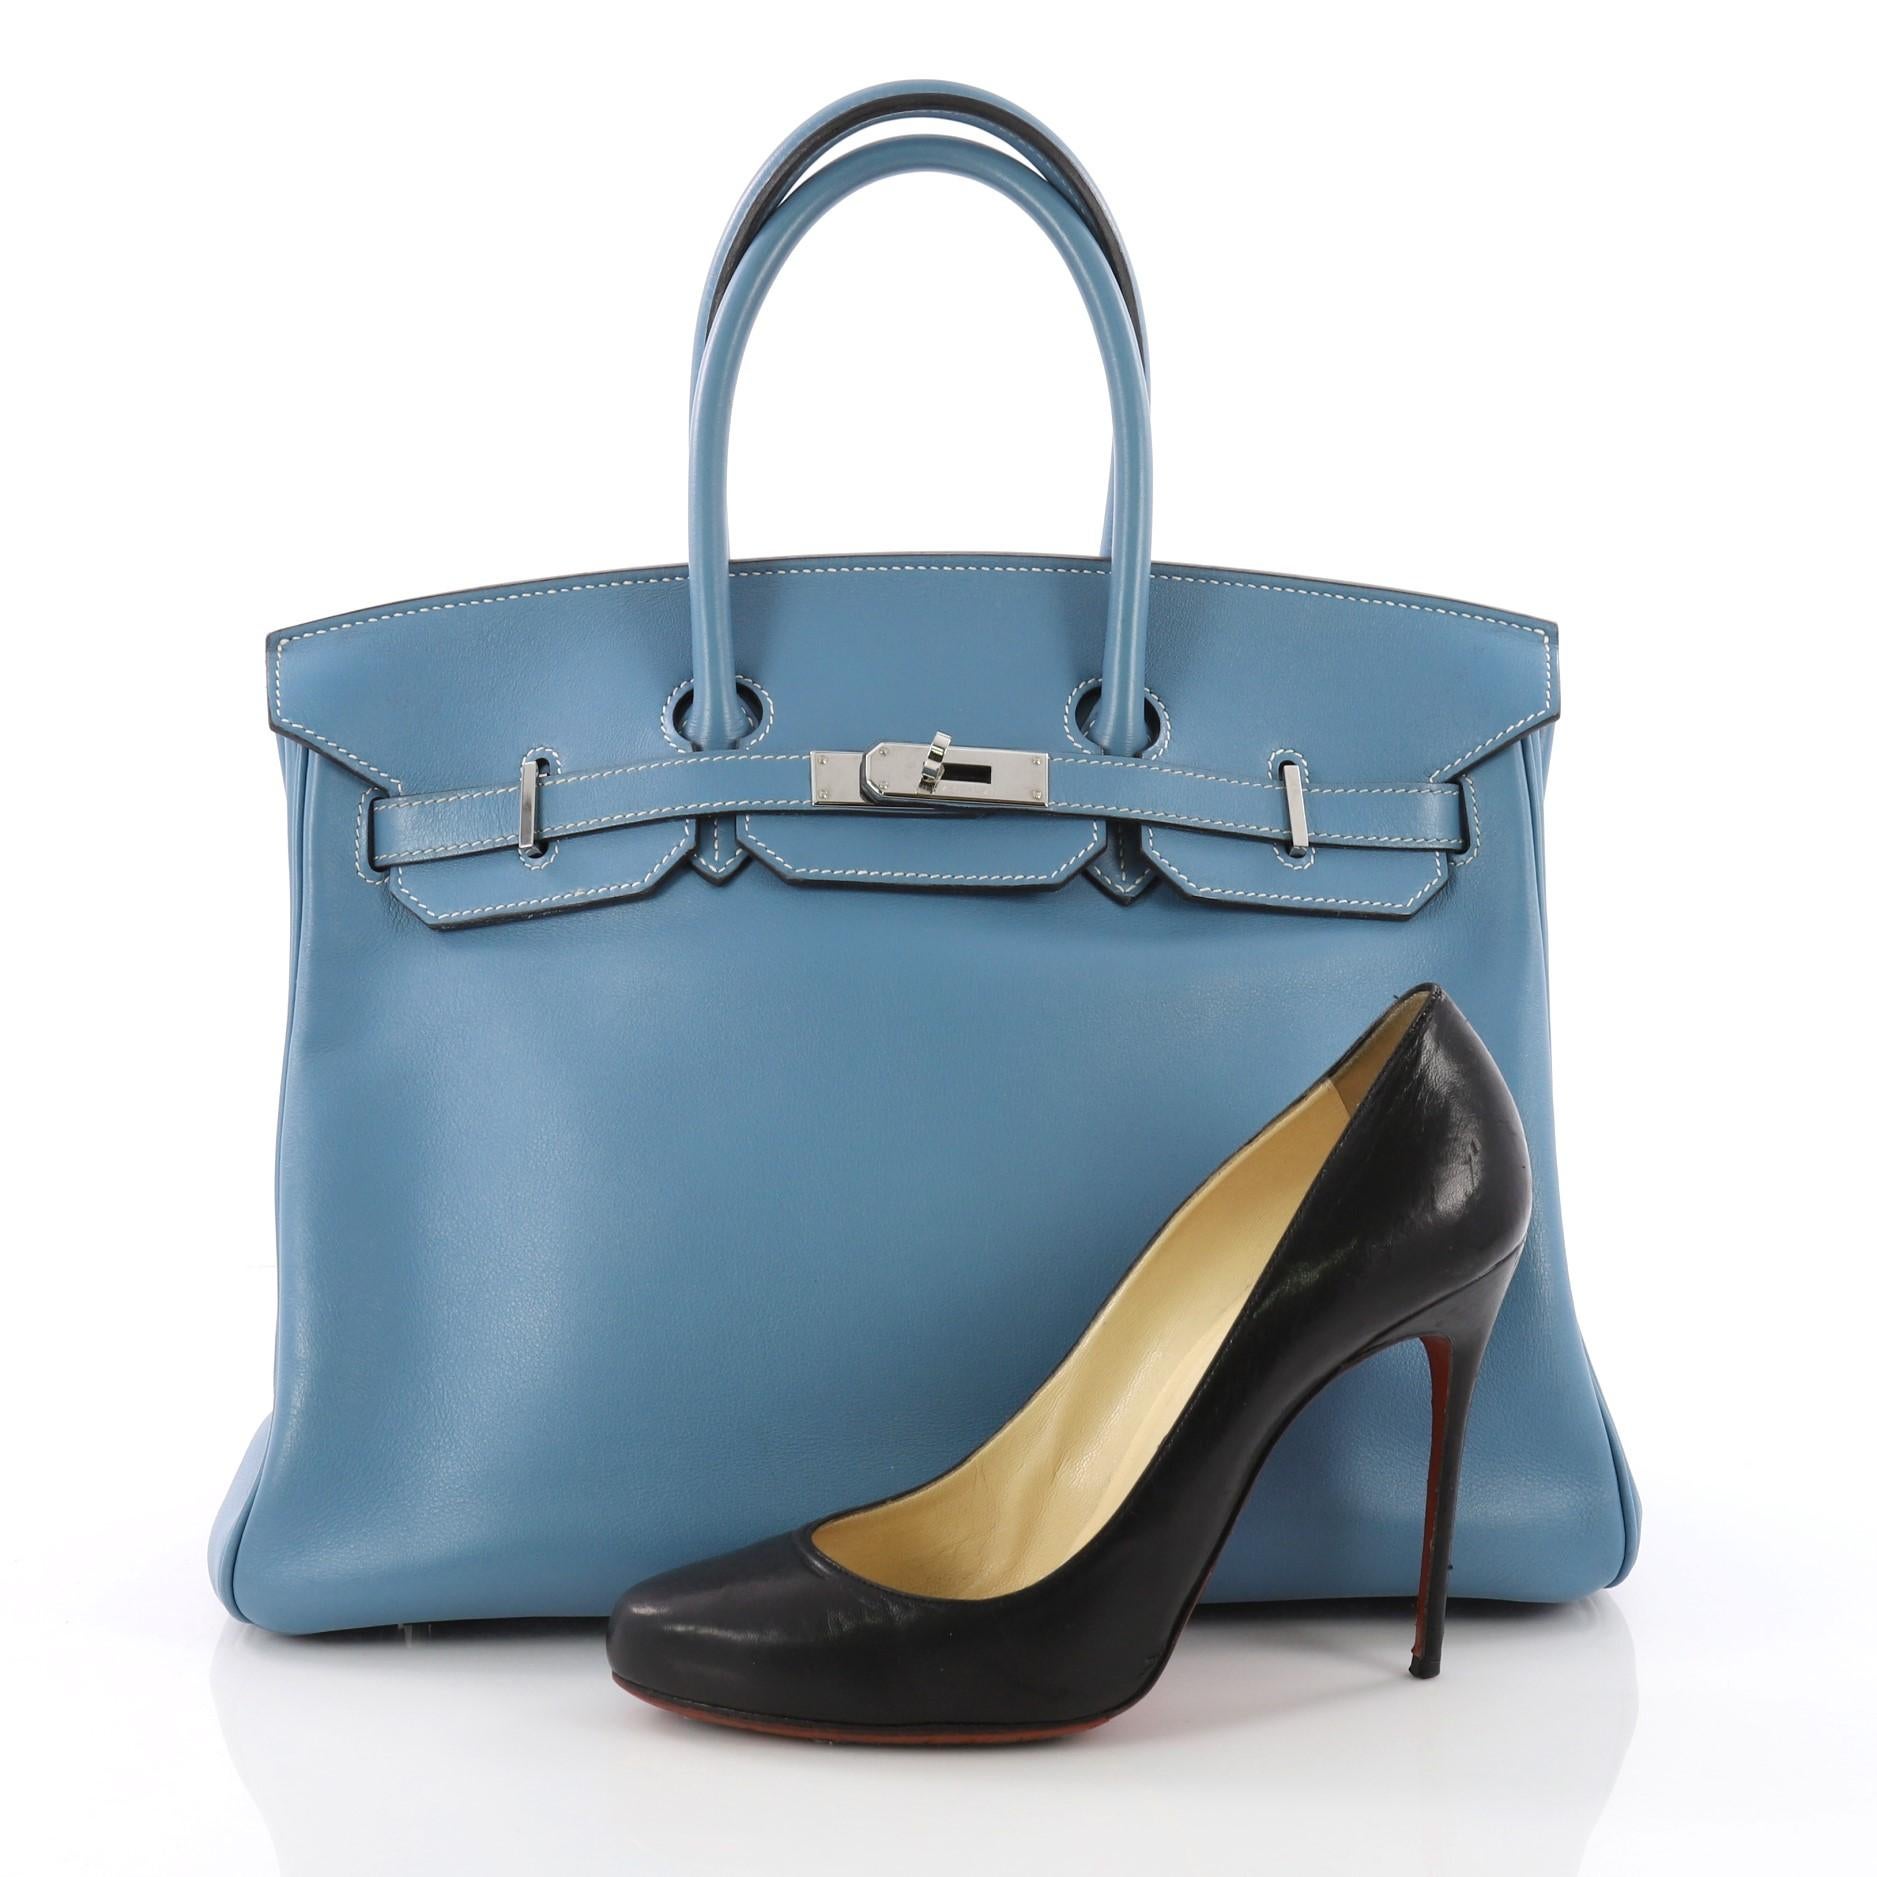 This authentic Hermes Birkin Handbag Blue Jean Swift with Palladium Hardware 35 stands as one of the most-coveted and timeless bags fit for any fashionista. Constructed from scratch-resistant Blue Jean swift leather, this bag features dual-rolled